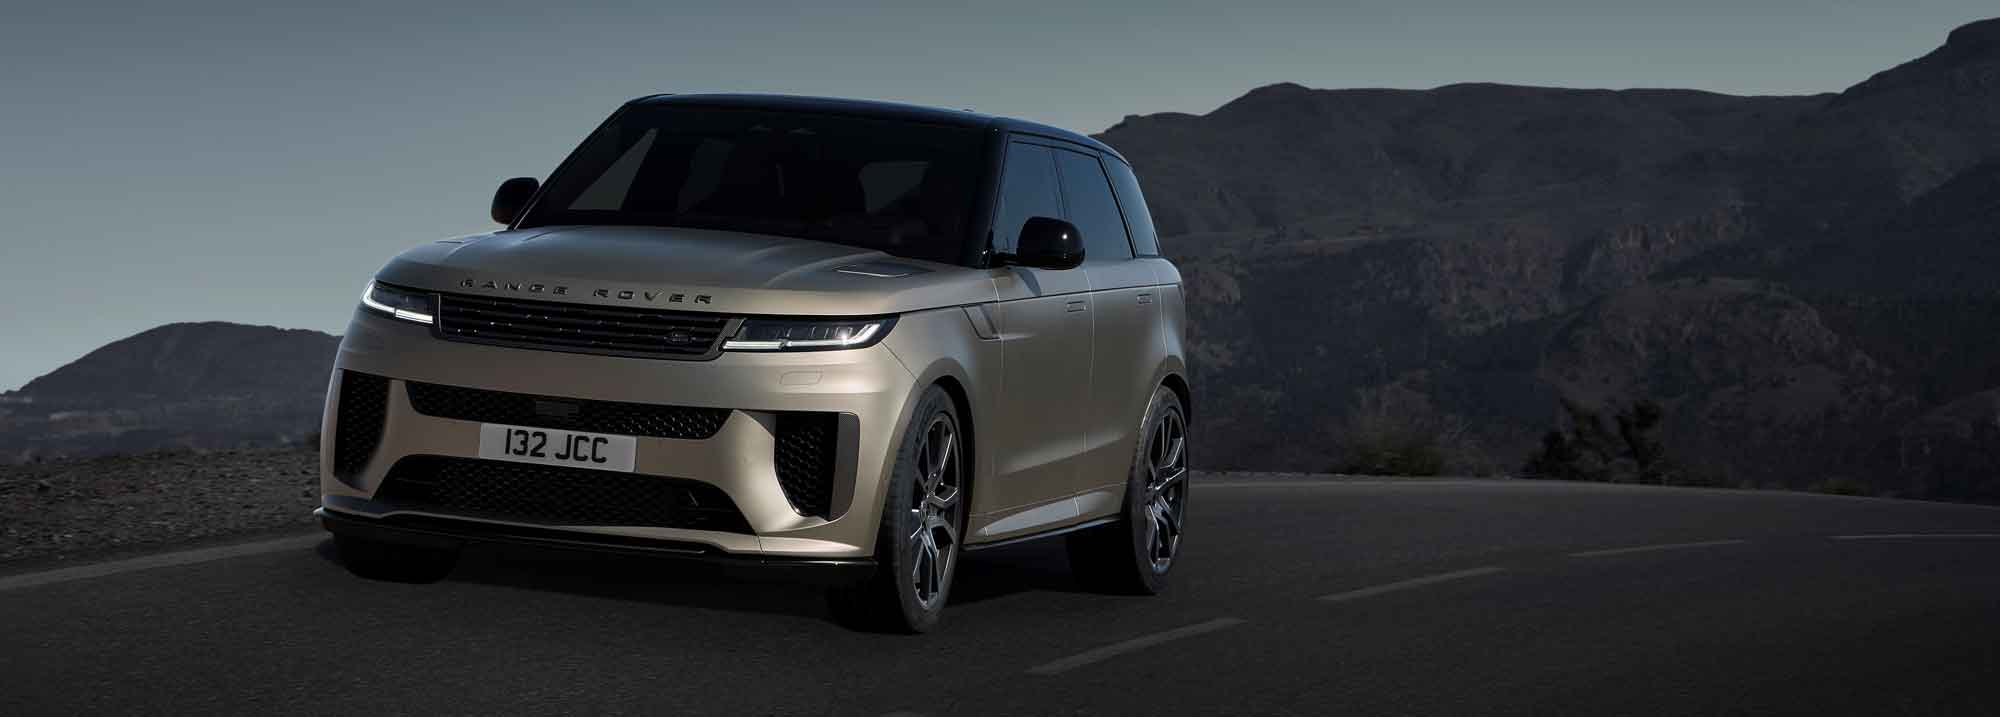 Range Rover launches most powerful model yet